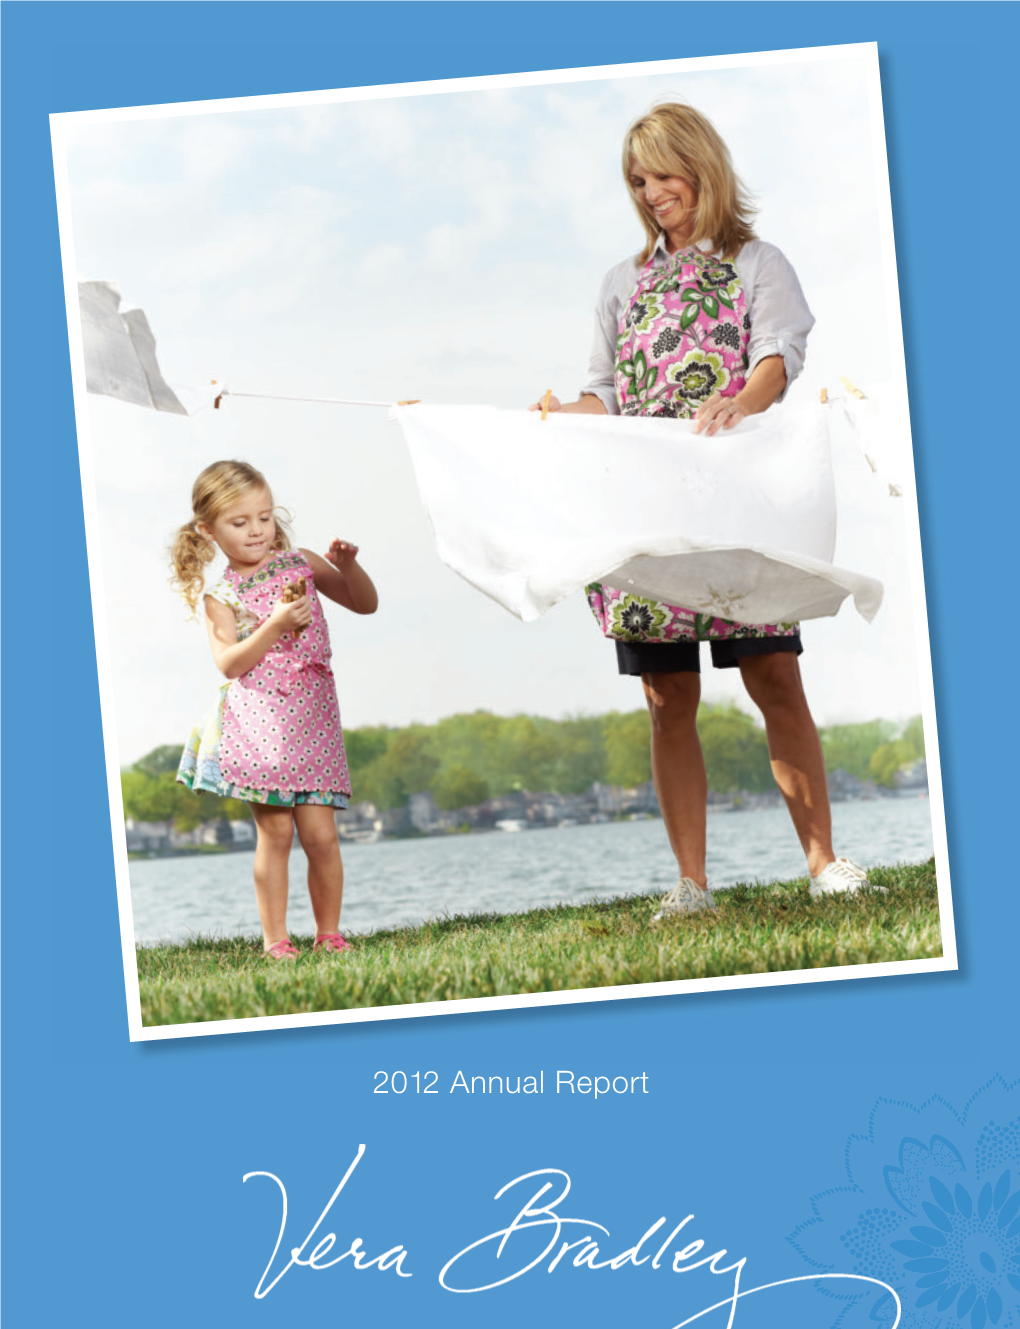 Fiscal 2012 Annual Report